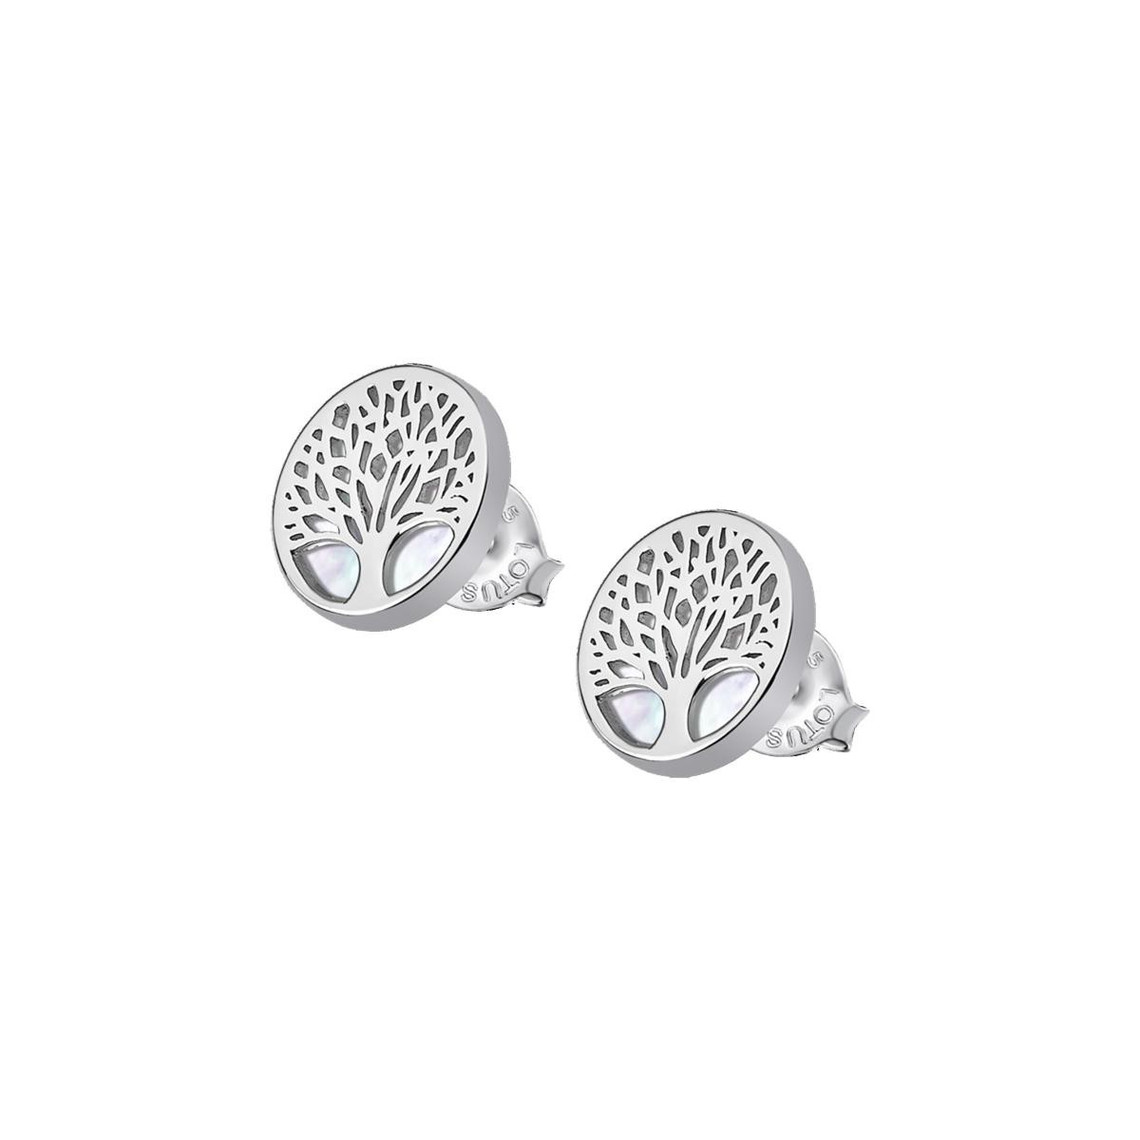 boucles d'oreilles lotus silver tree of life lp1678-4-1 - boucles d'oreilles tree of life argent lotus silver